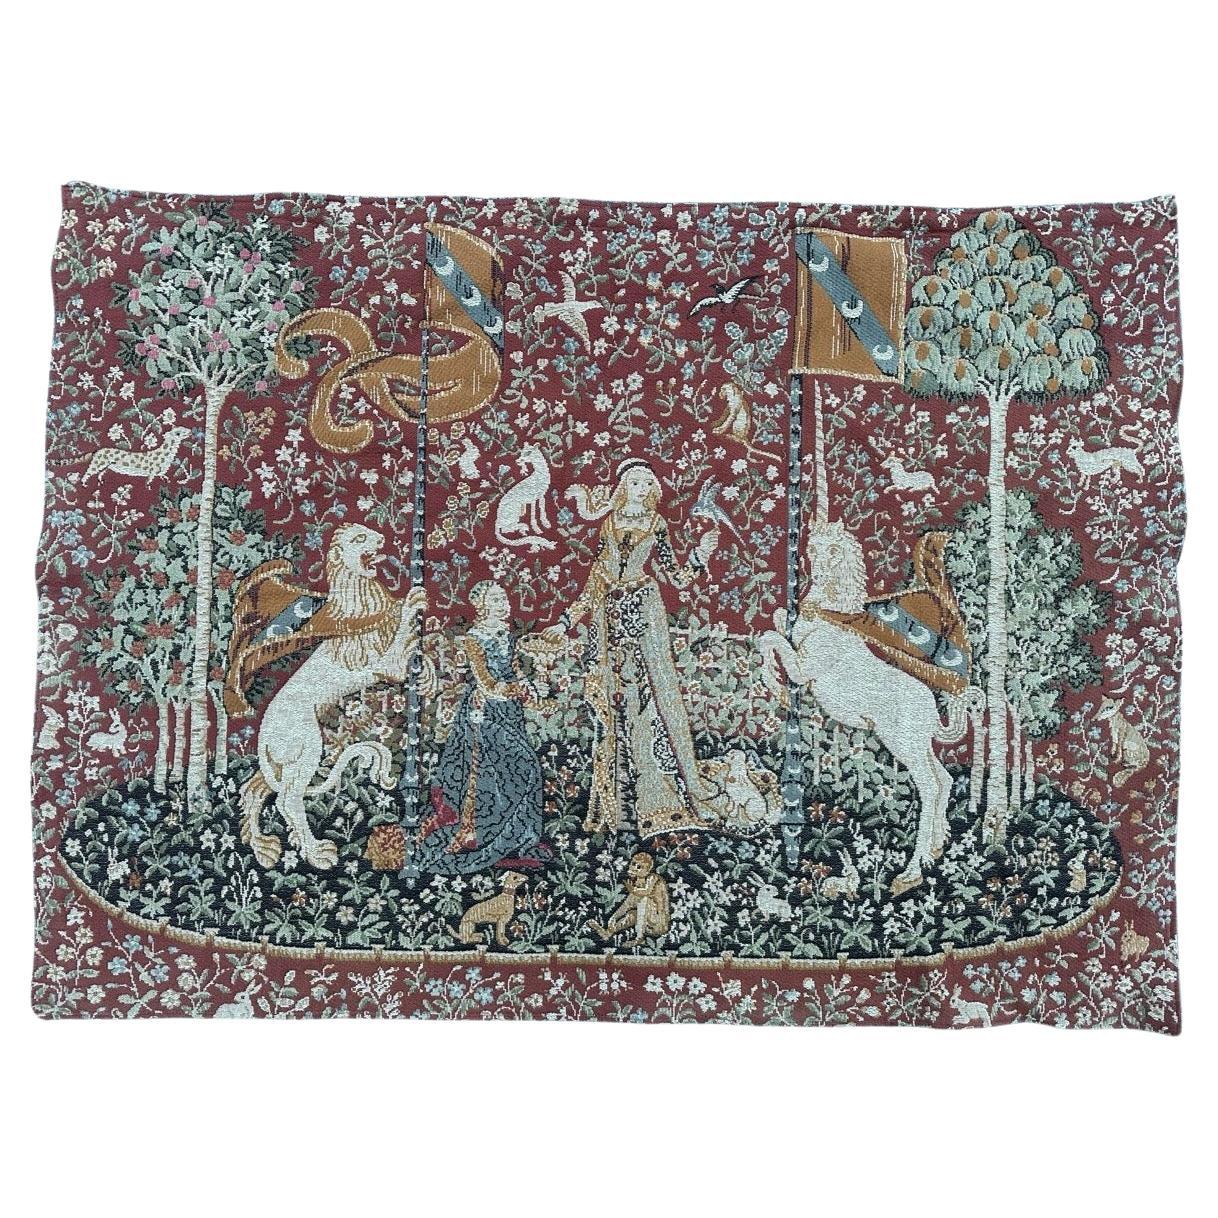 Bobyrug’s nice vintage French Aubusson style Jacquard tapestry “lady and licorn”